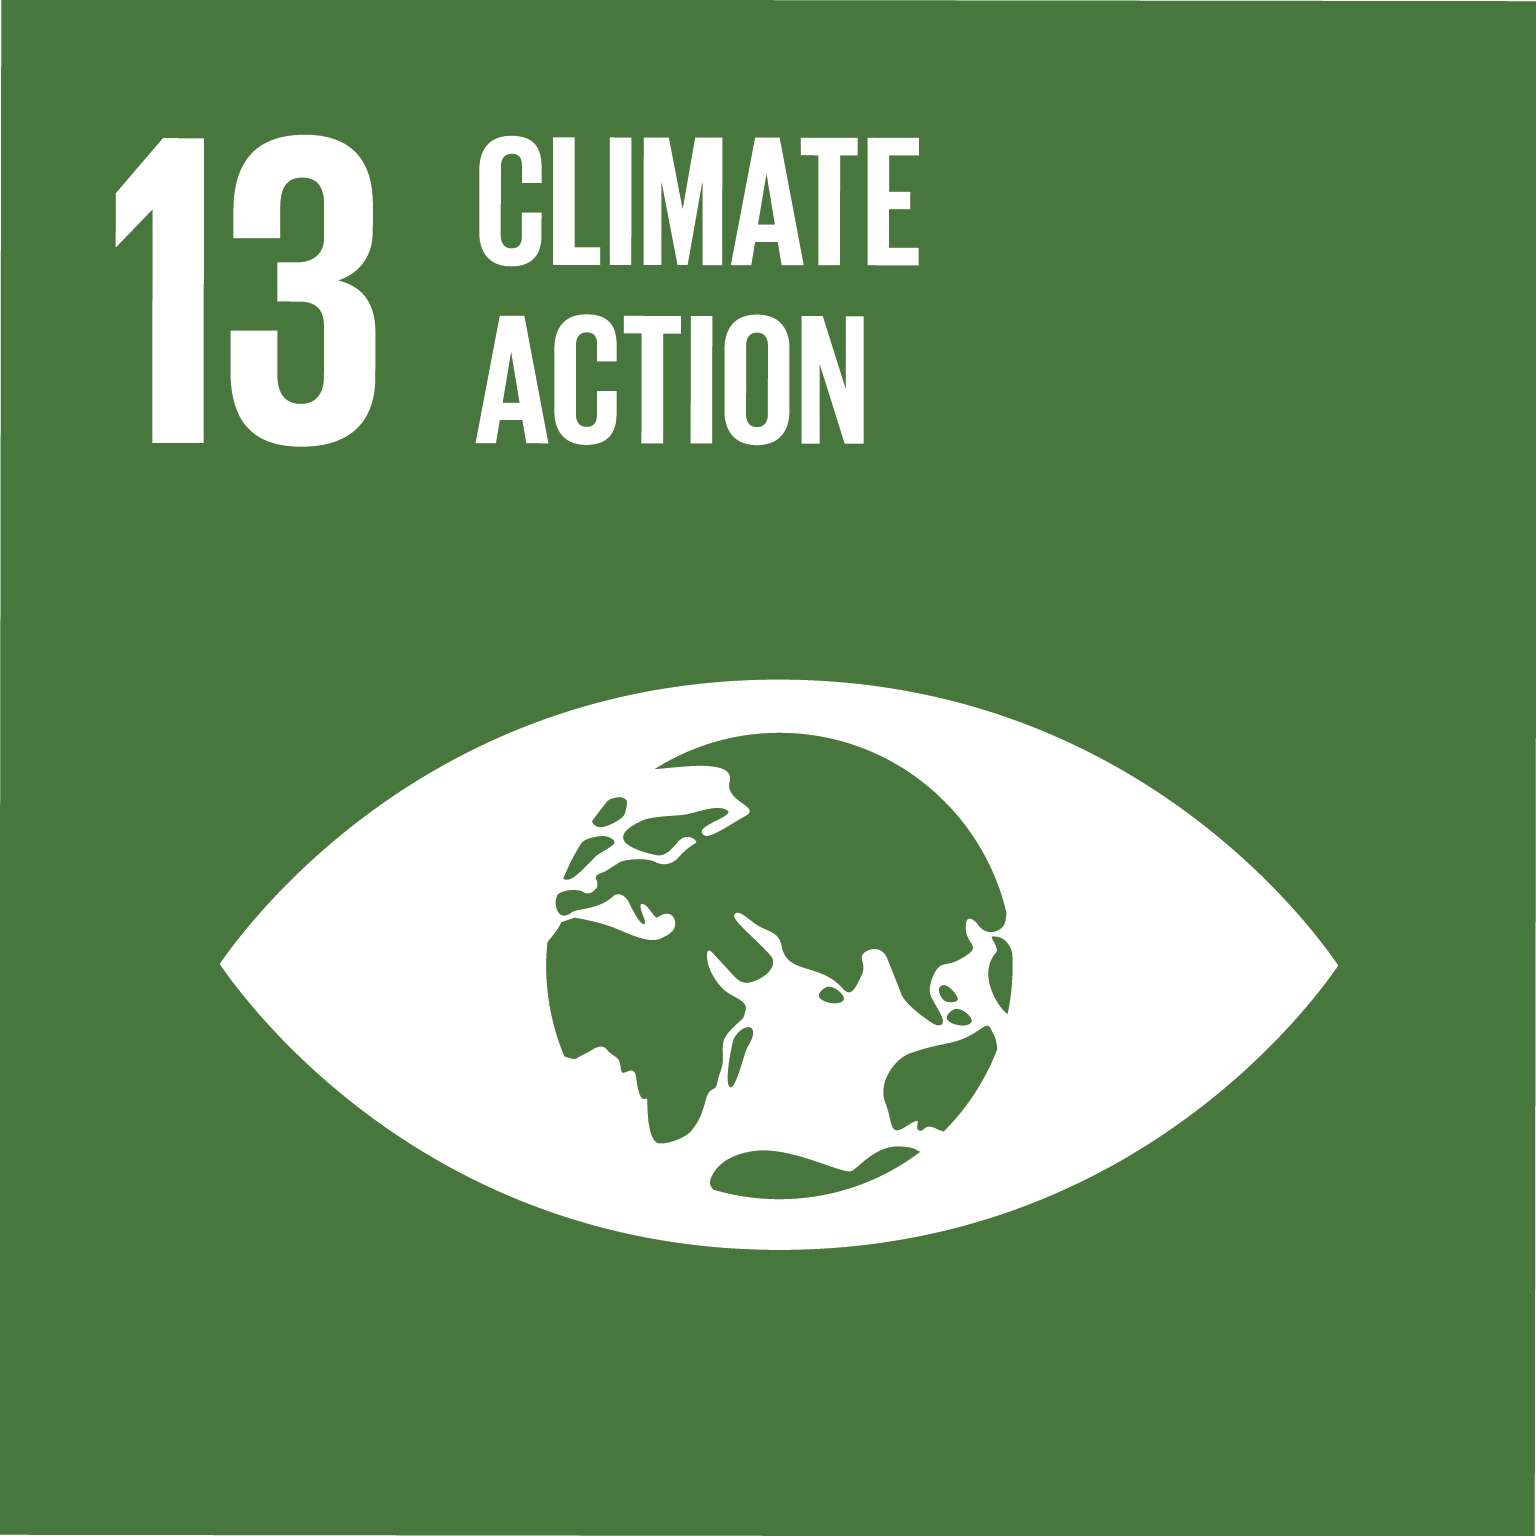 Goal 13: Climate Action, the text of this infographic is listed below